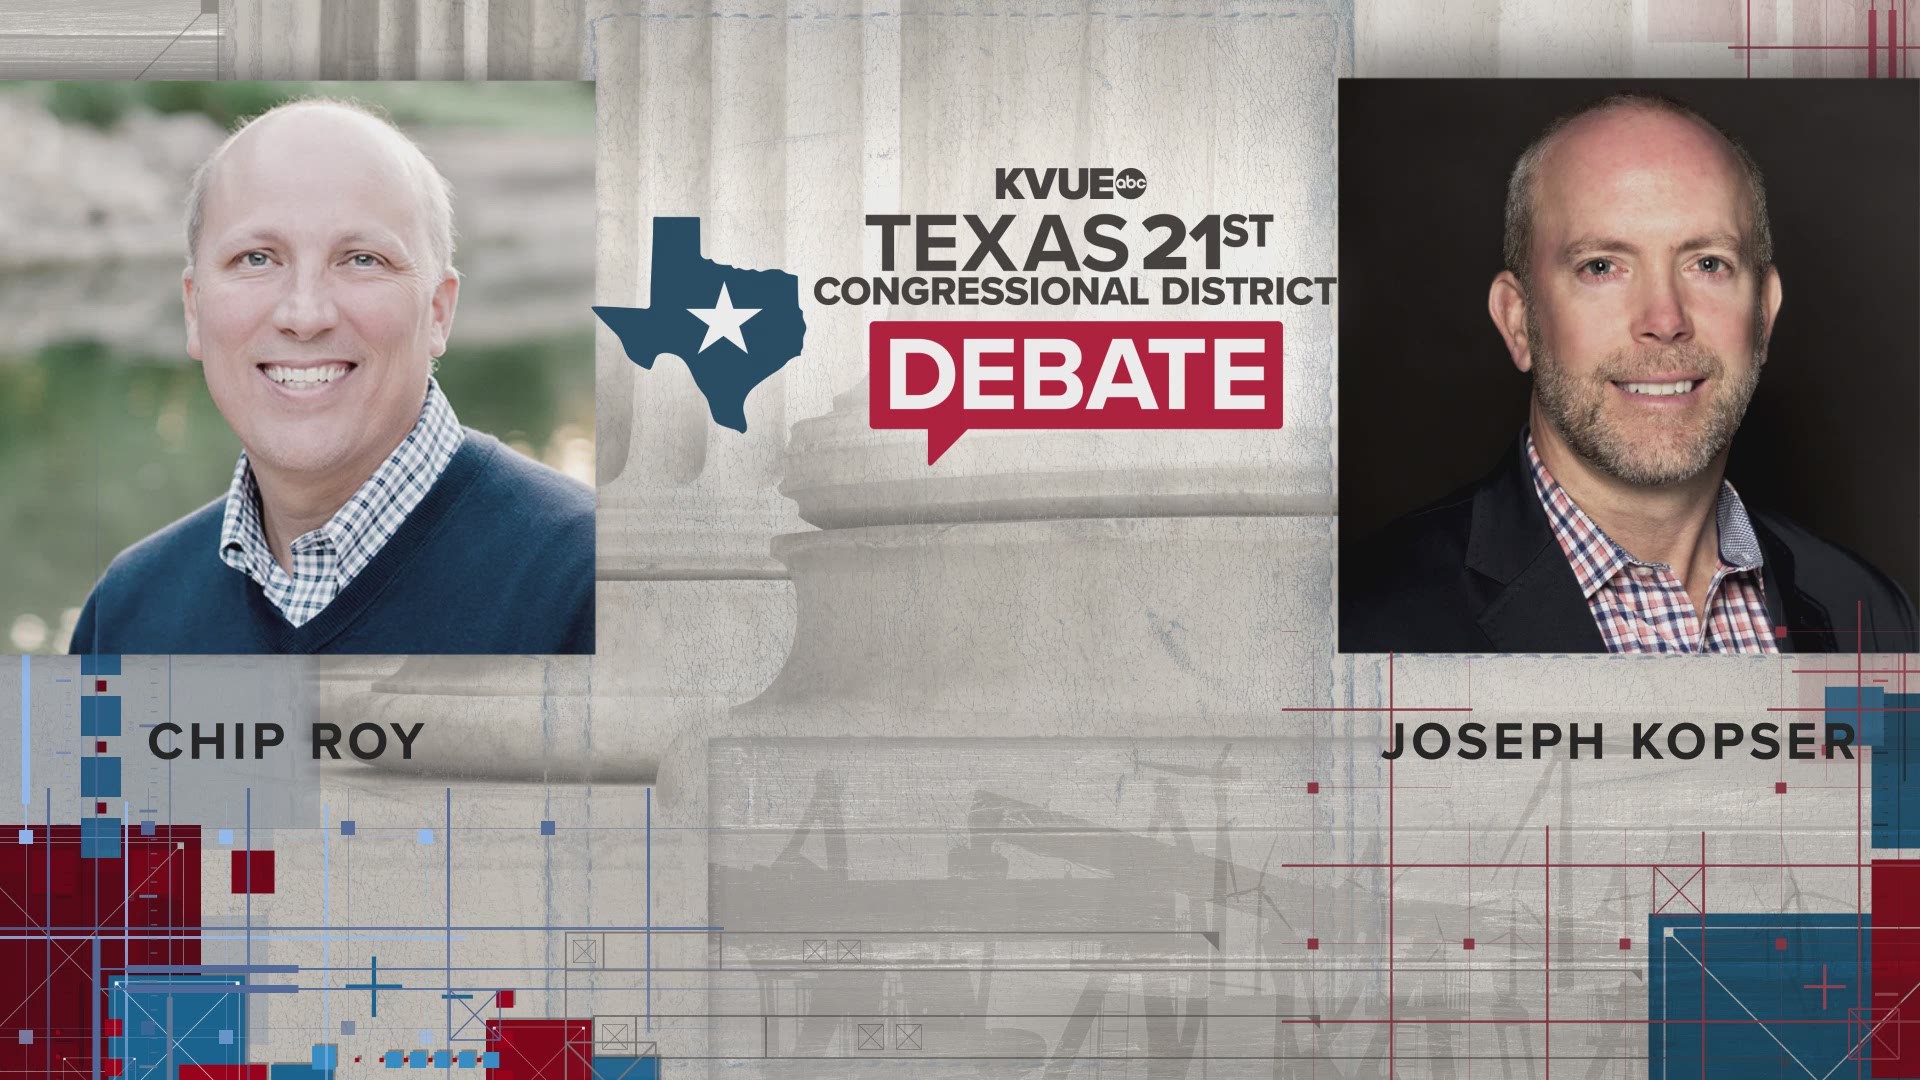 KVUE will broadcast the U.S. House of Representatives debate on Oct. 16 on television and multiple digital platforms so you do not miss out on what the candidates have to say.